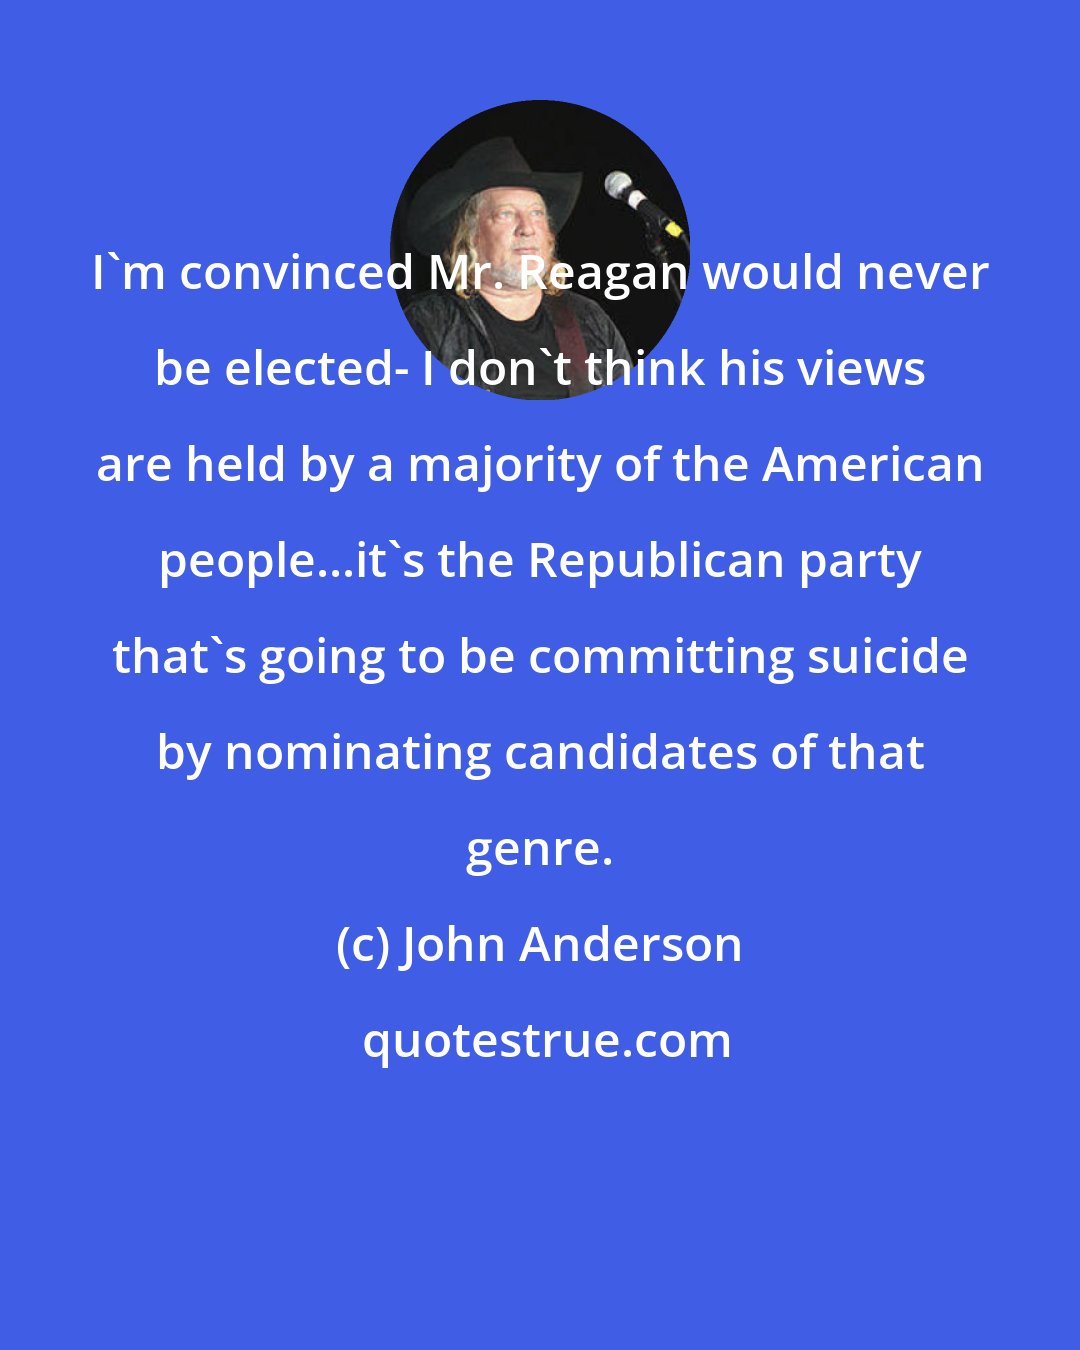 John Anderson: I'm convinced Mr. Reagan would never be elected- I don't think his views are held by a majority of the American people...it's the Republican party that's going to be committing suicide by nominating candidates of that genre.